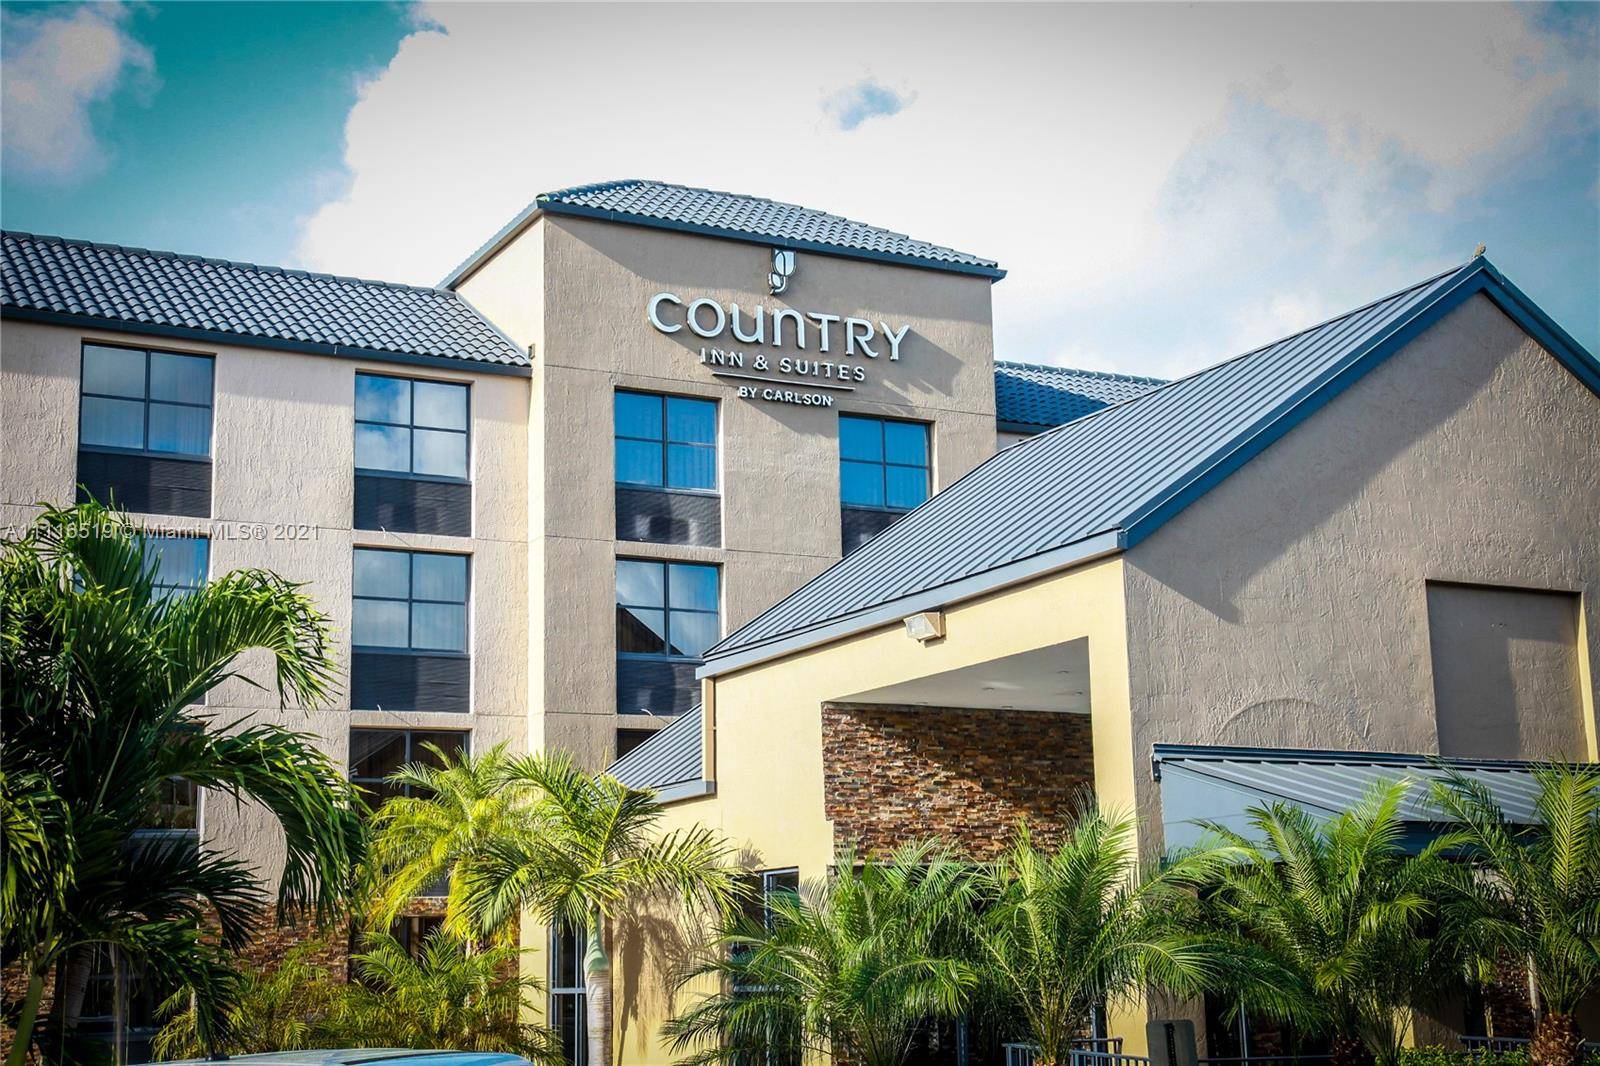 Country Inn and Suites by Radisson is a mid to upscale limited service hotel in busy Kendall, Florida.